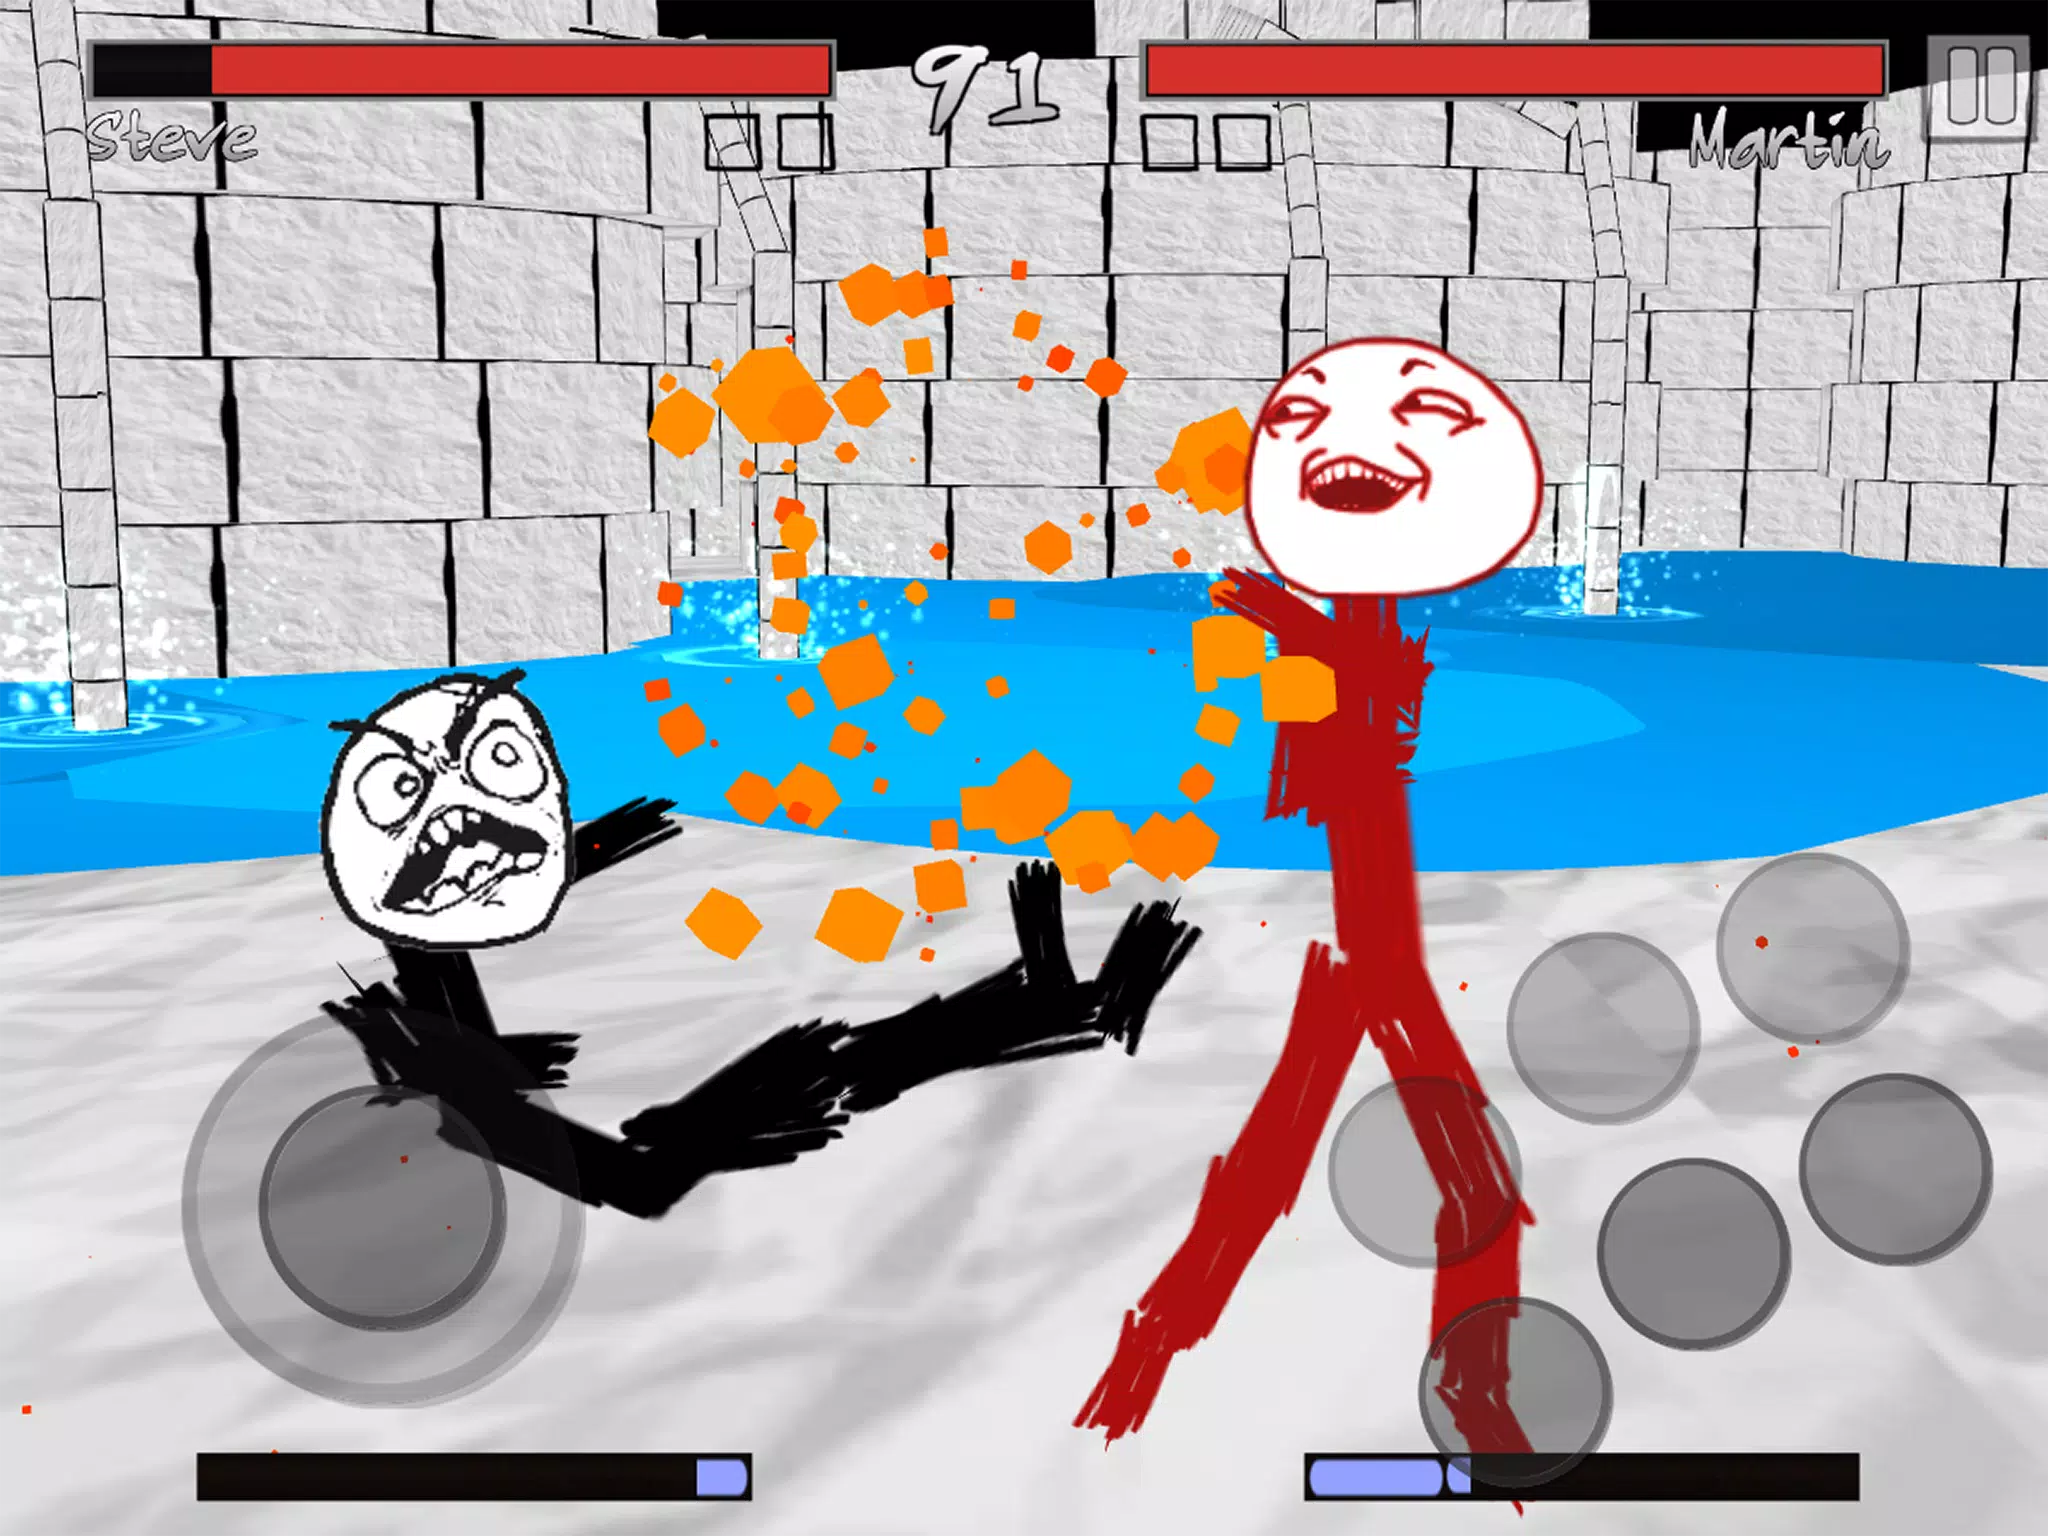 Stickman Meme Fight::Appstore for Android